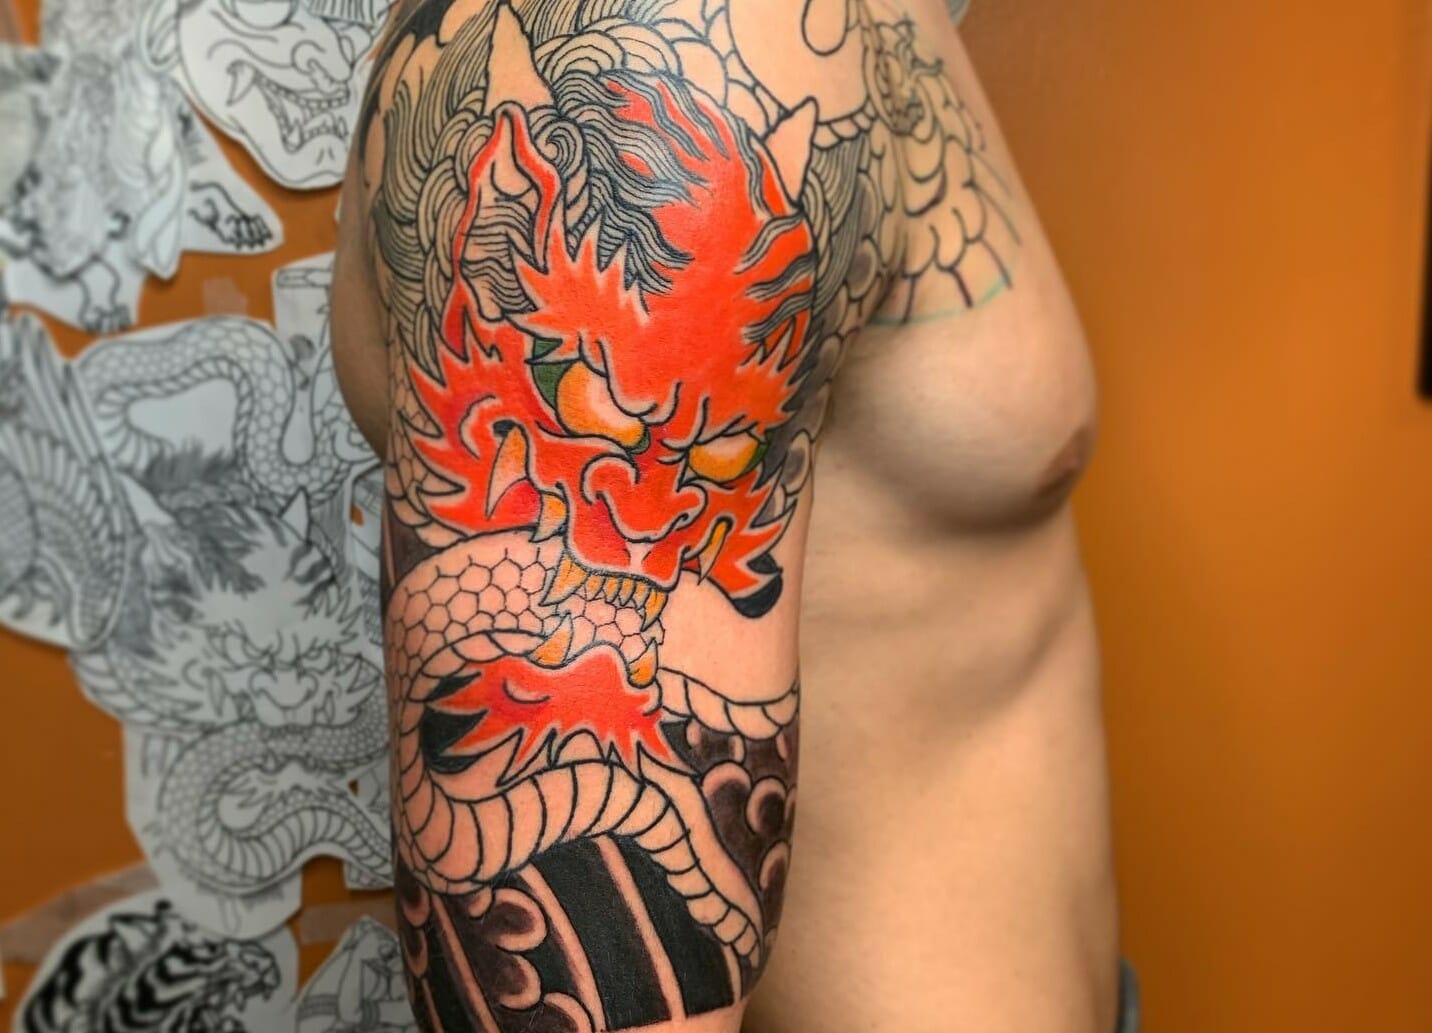 Full Body Japanese Tattoo Ideas That Are Going to Blow Your Mind